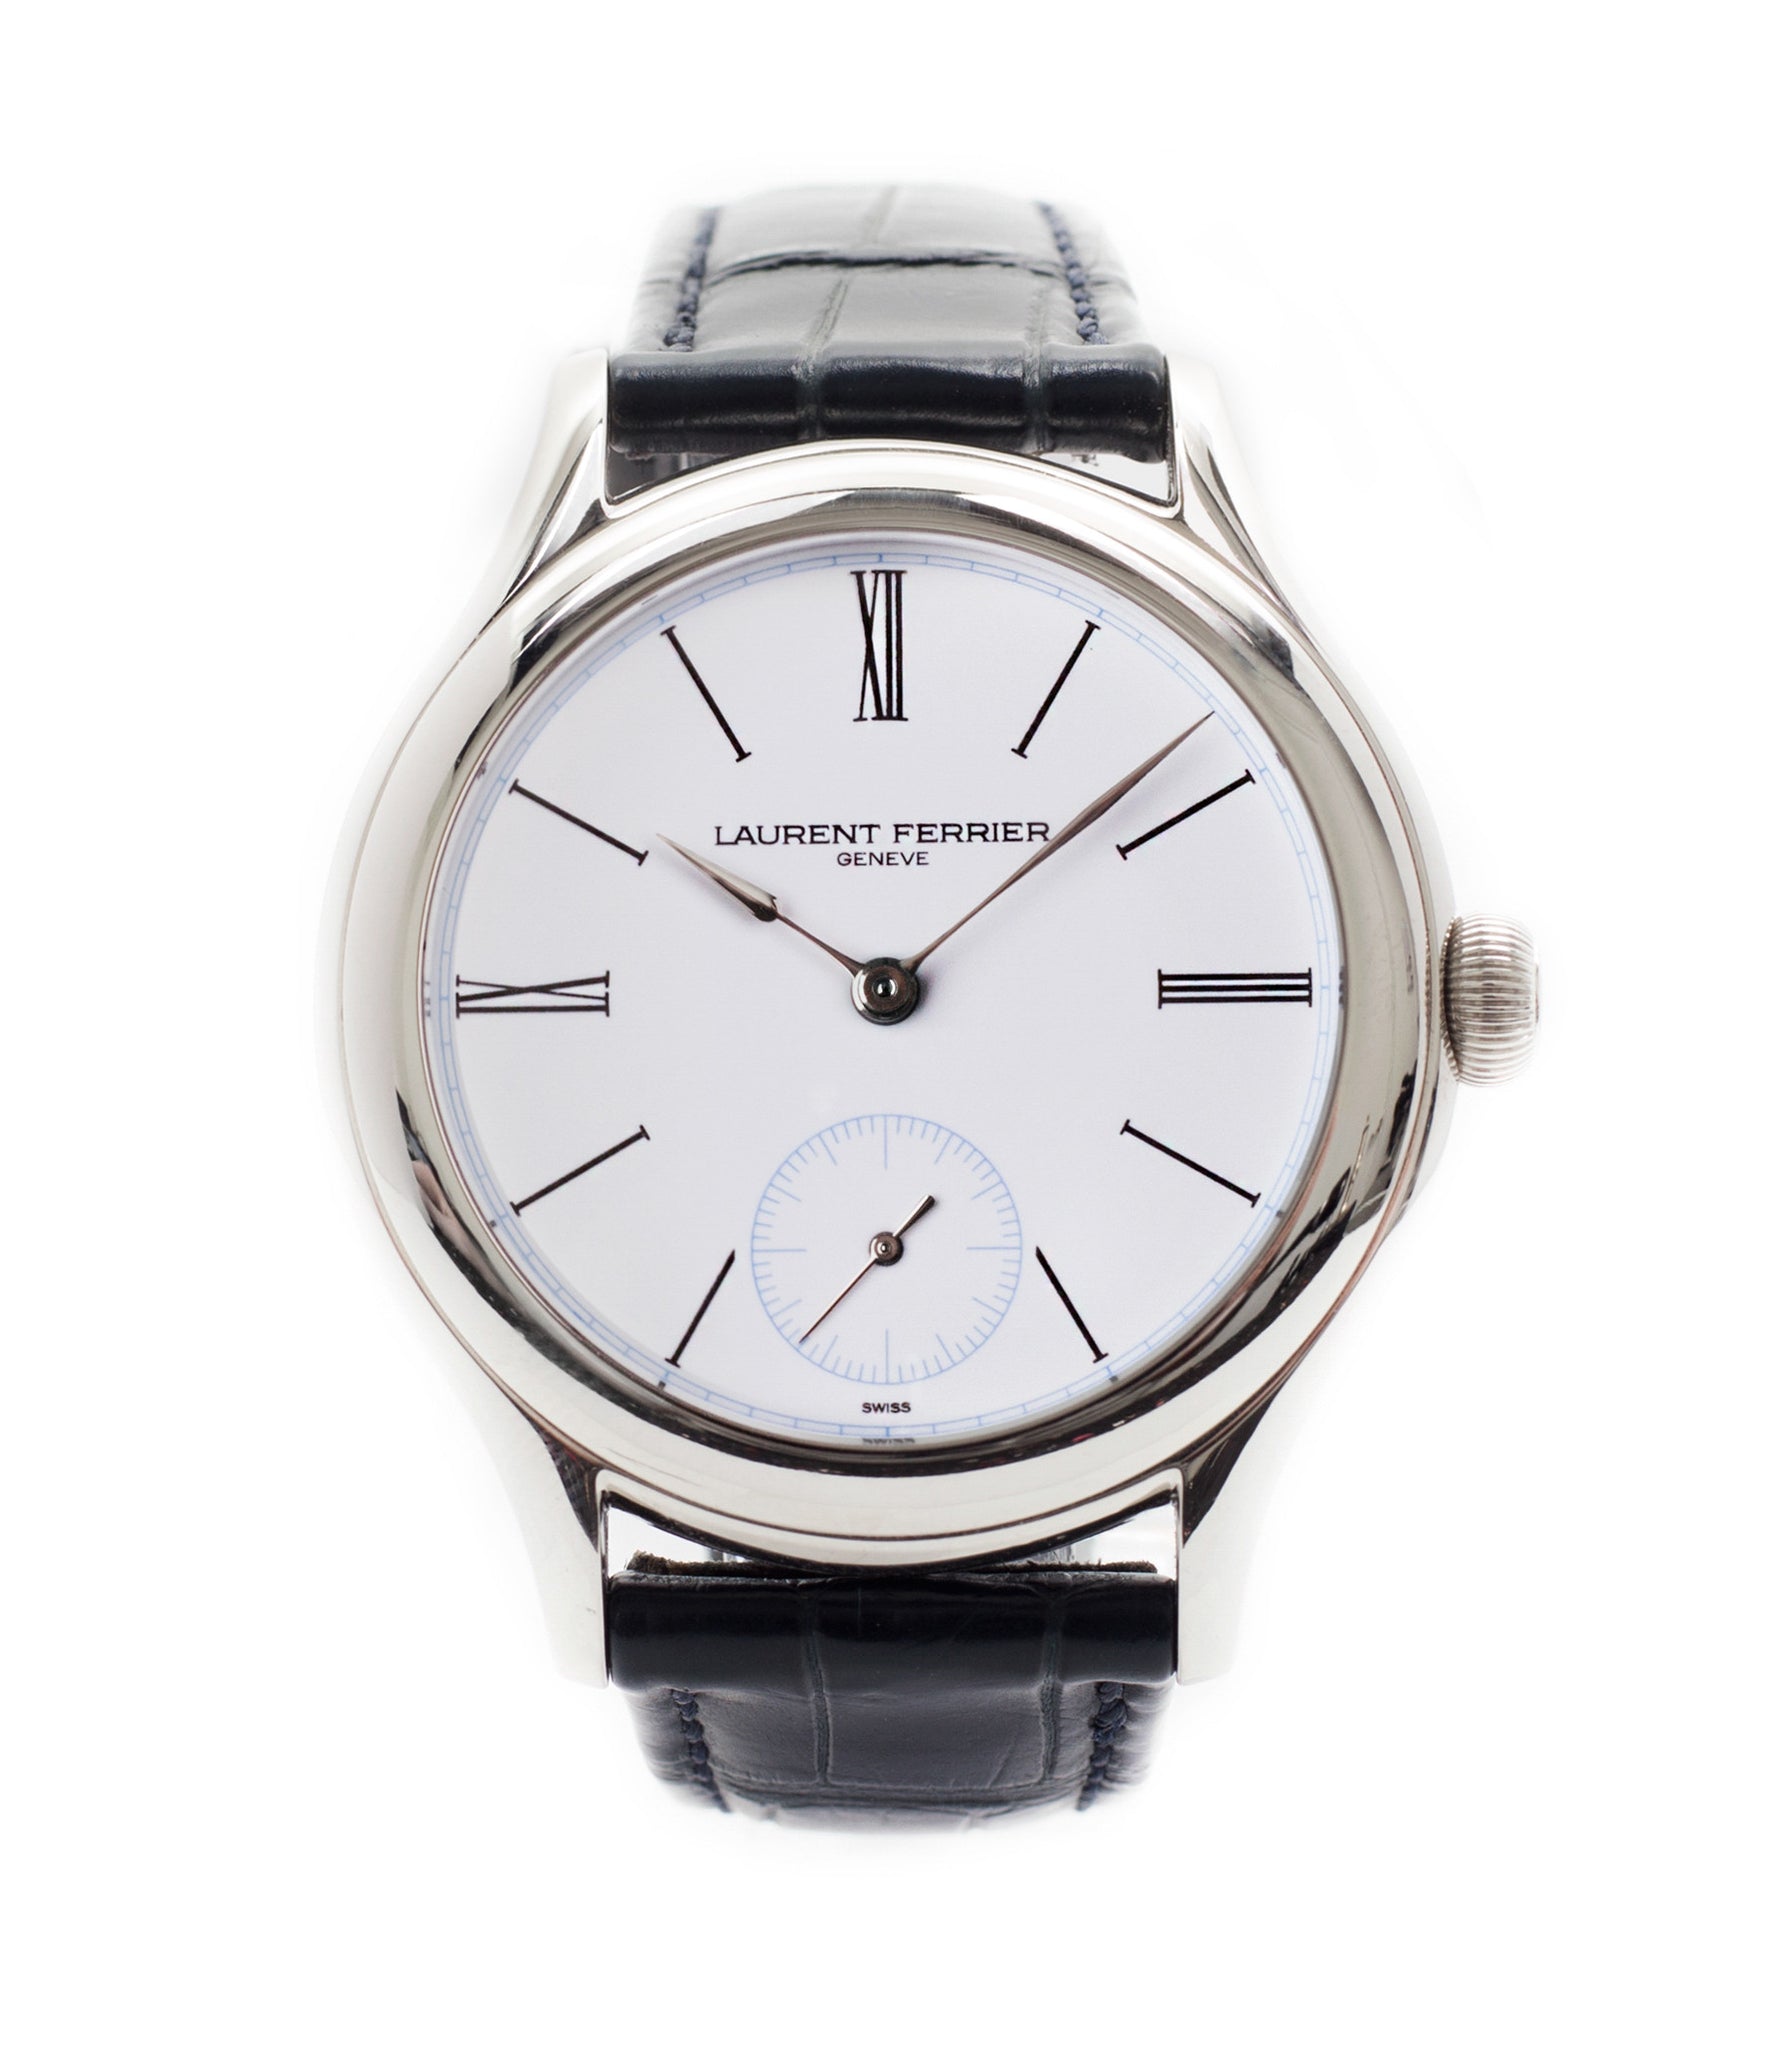 buy Laurent Ferrier Galet Micro-rotor LCF006 platinum enamel dial limited edition watch for sale online at A Collected Man London specialist independent watchmakers